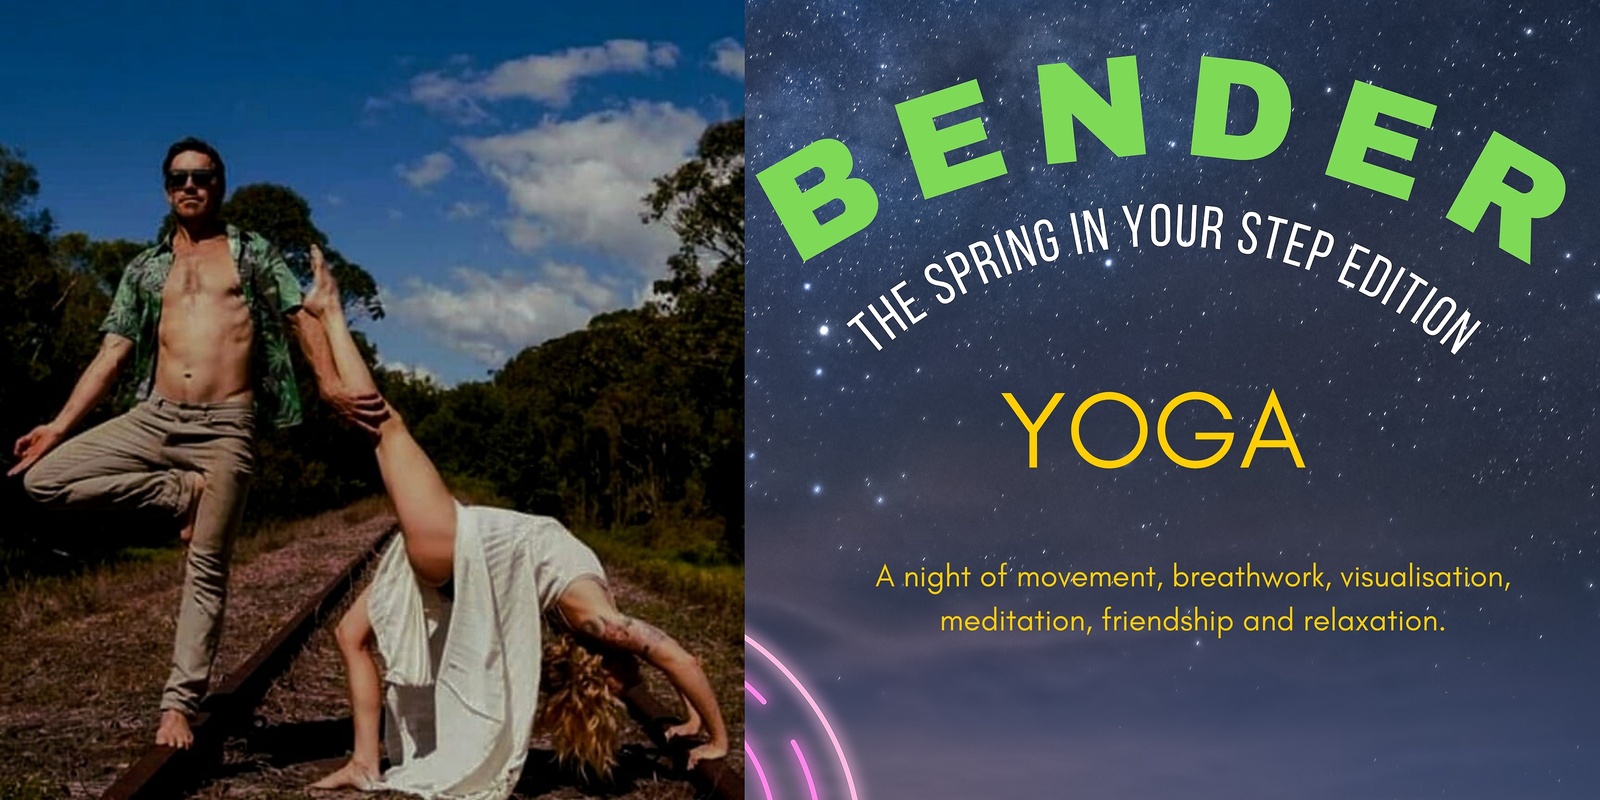 Banner image for Bender - The Spring In Your Step Edition